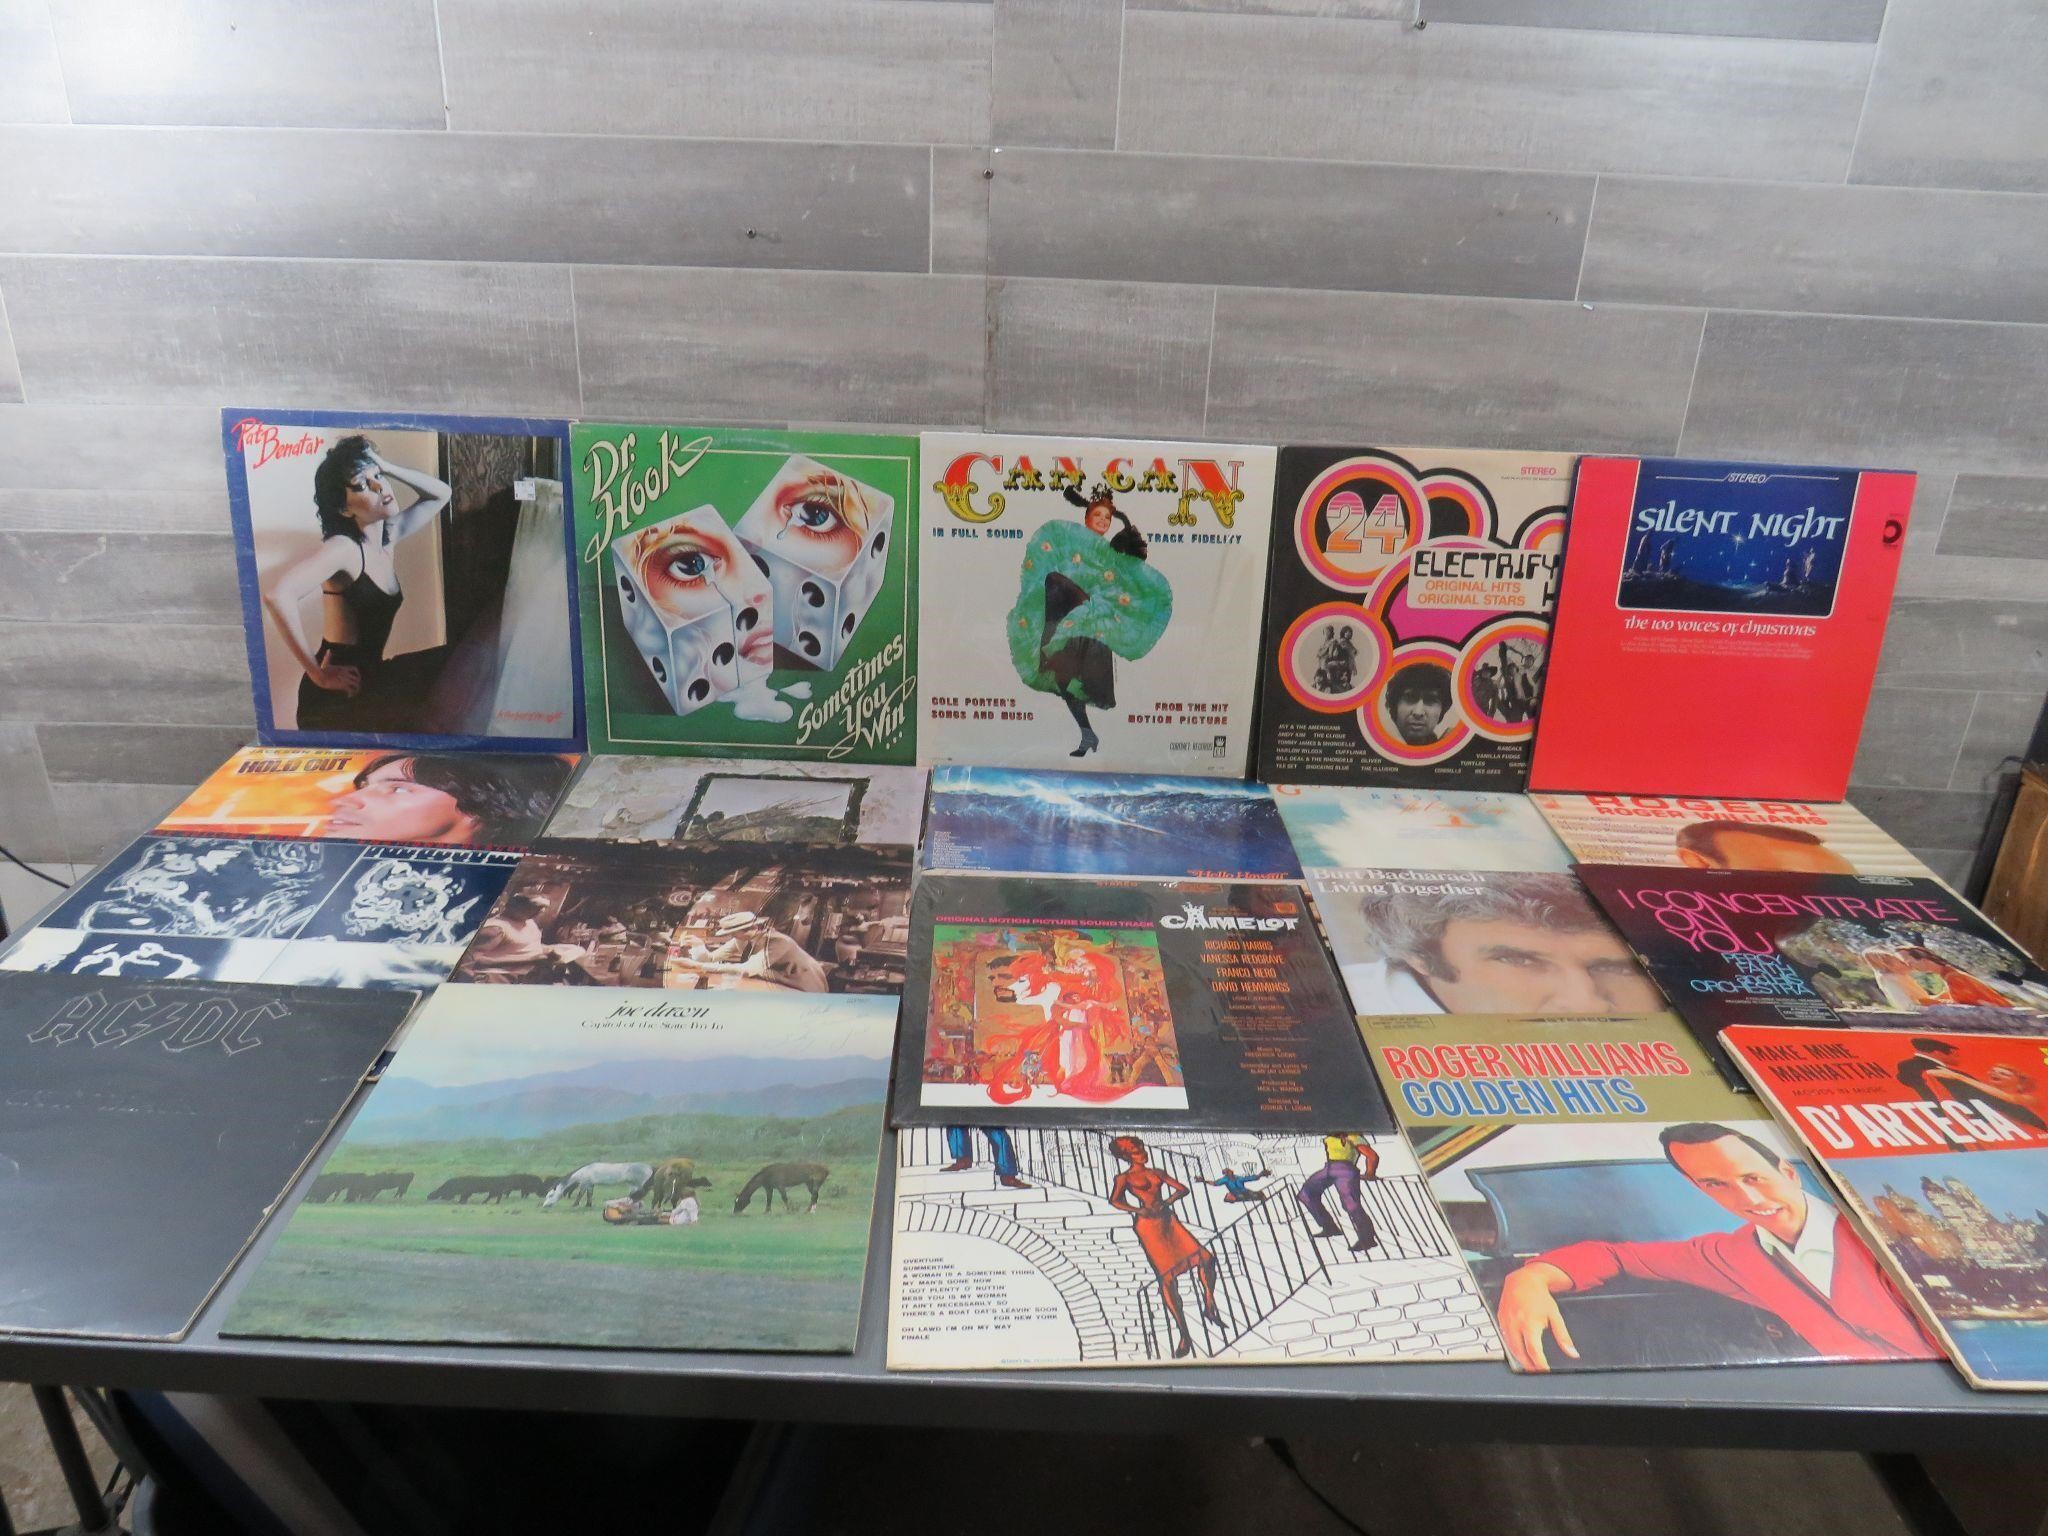 20 VARIOUS RECORDS